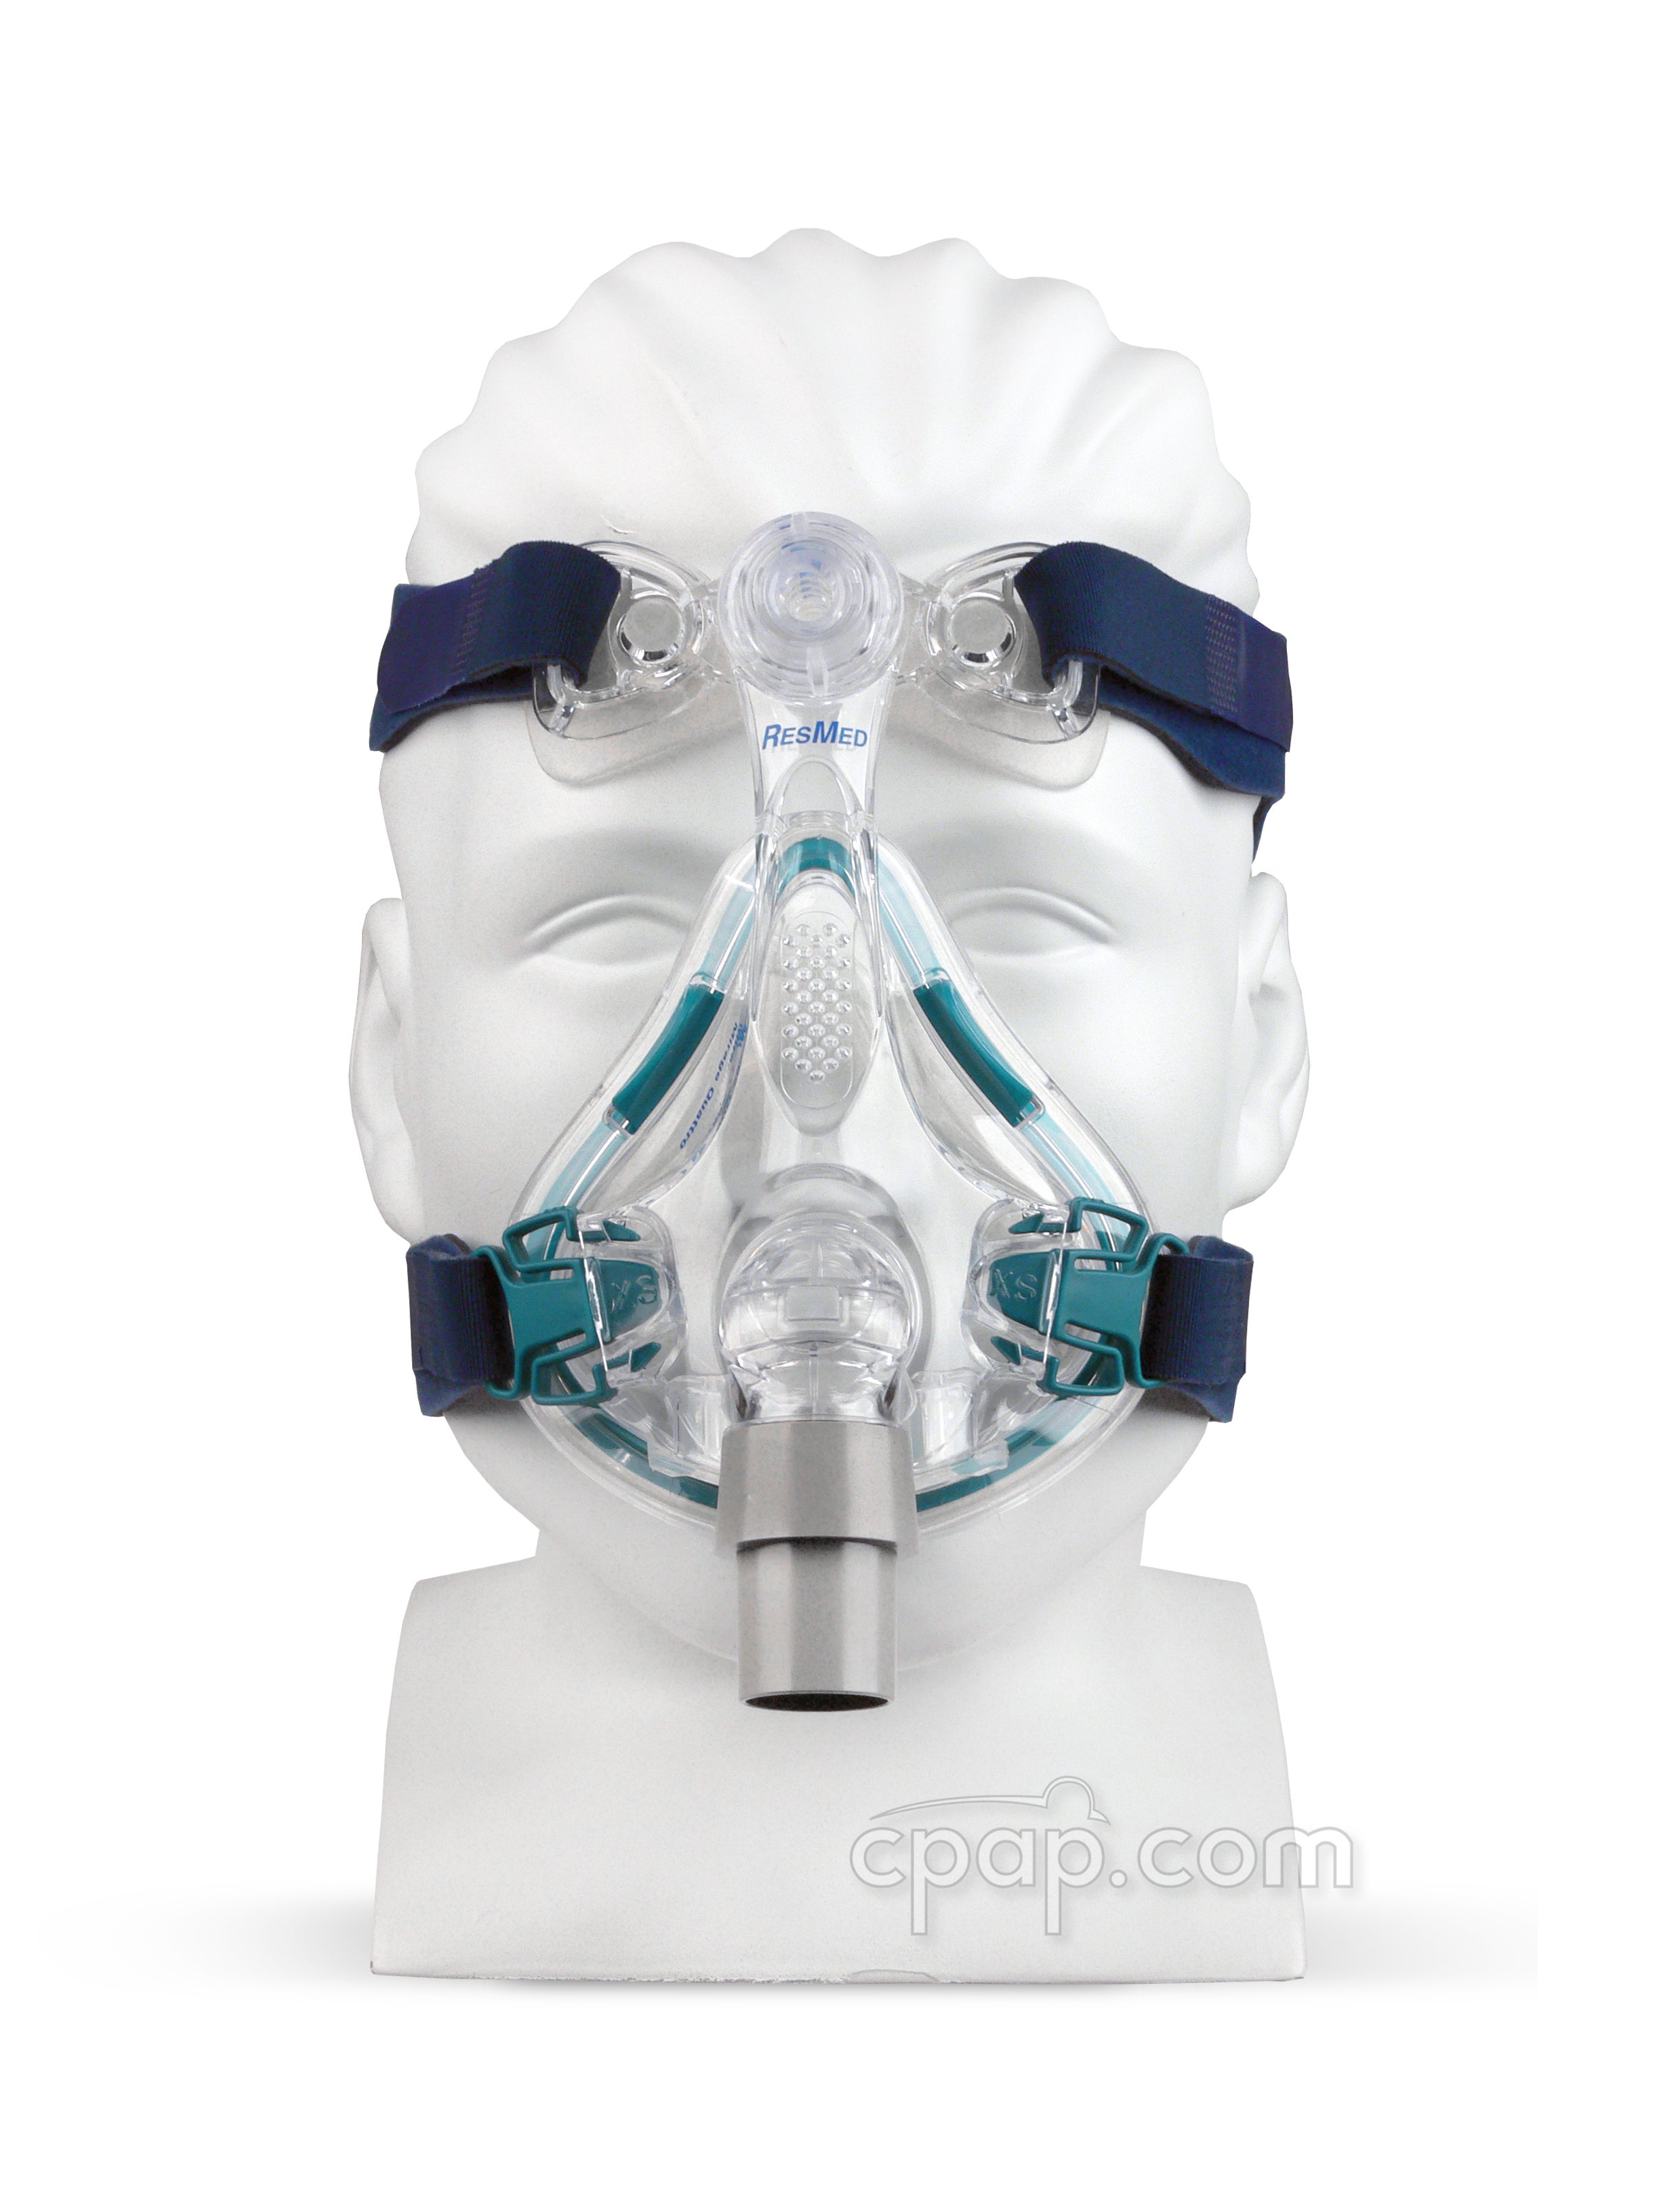 fe gruppe ånd ResMed Mirage Quattro Full Face CPAP Mask with Headgear - Best Prices &  Reviews | CPAP.com